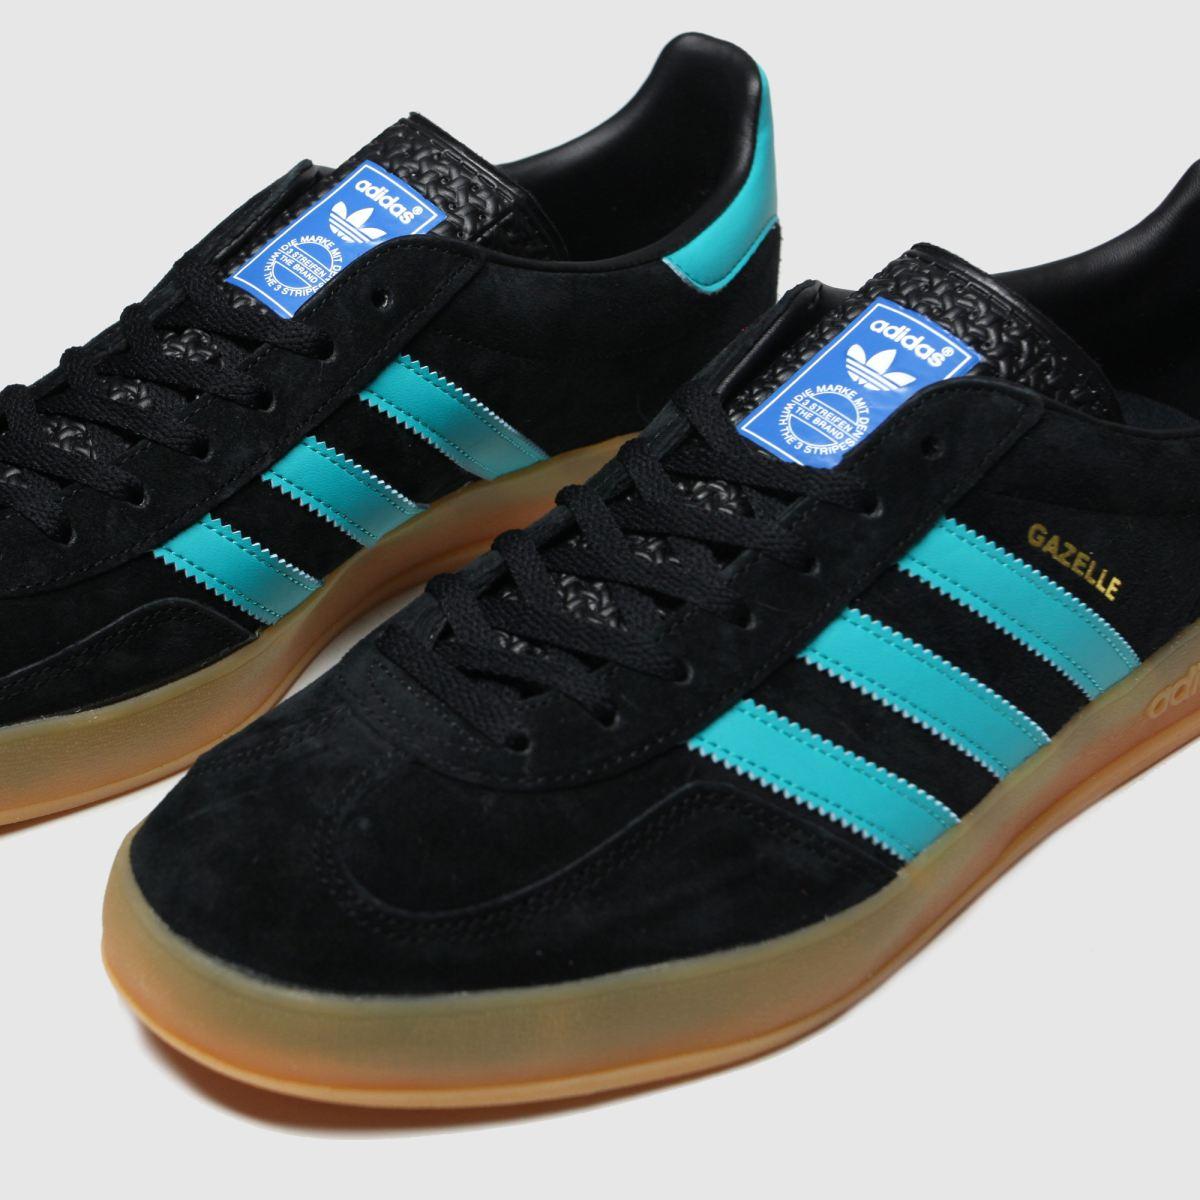 adidas black and blue trainers